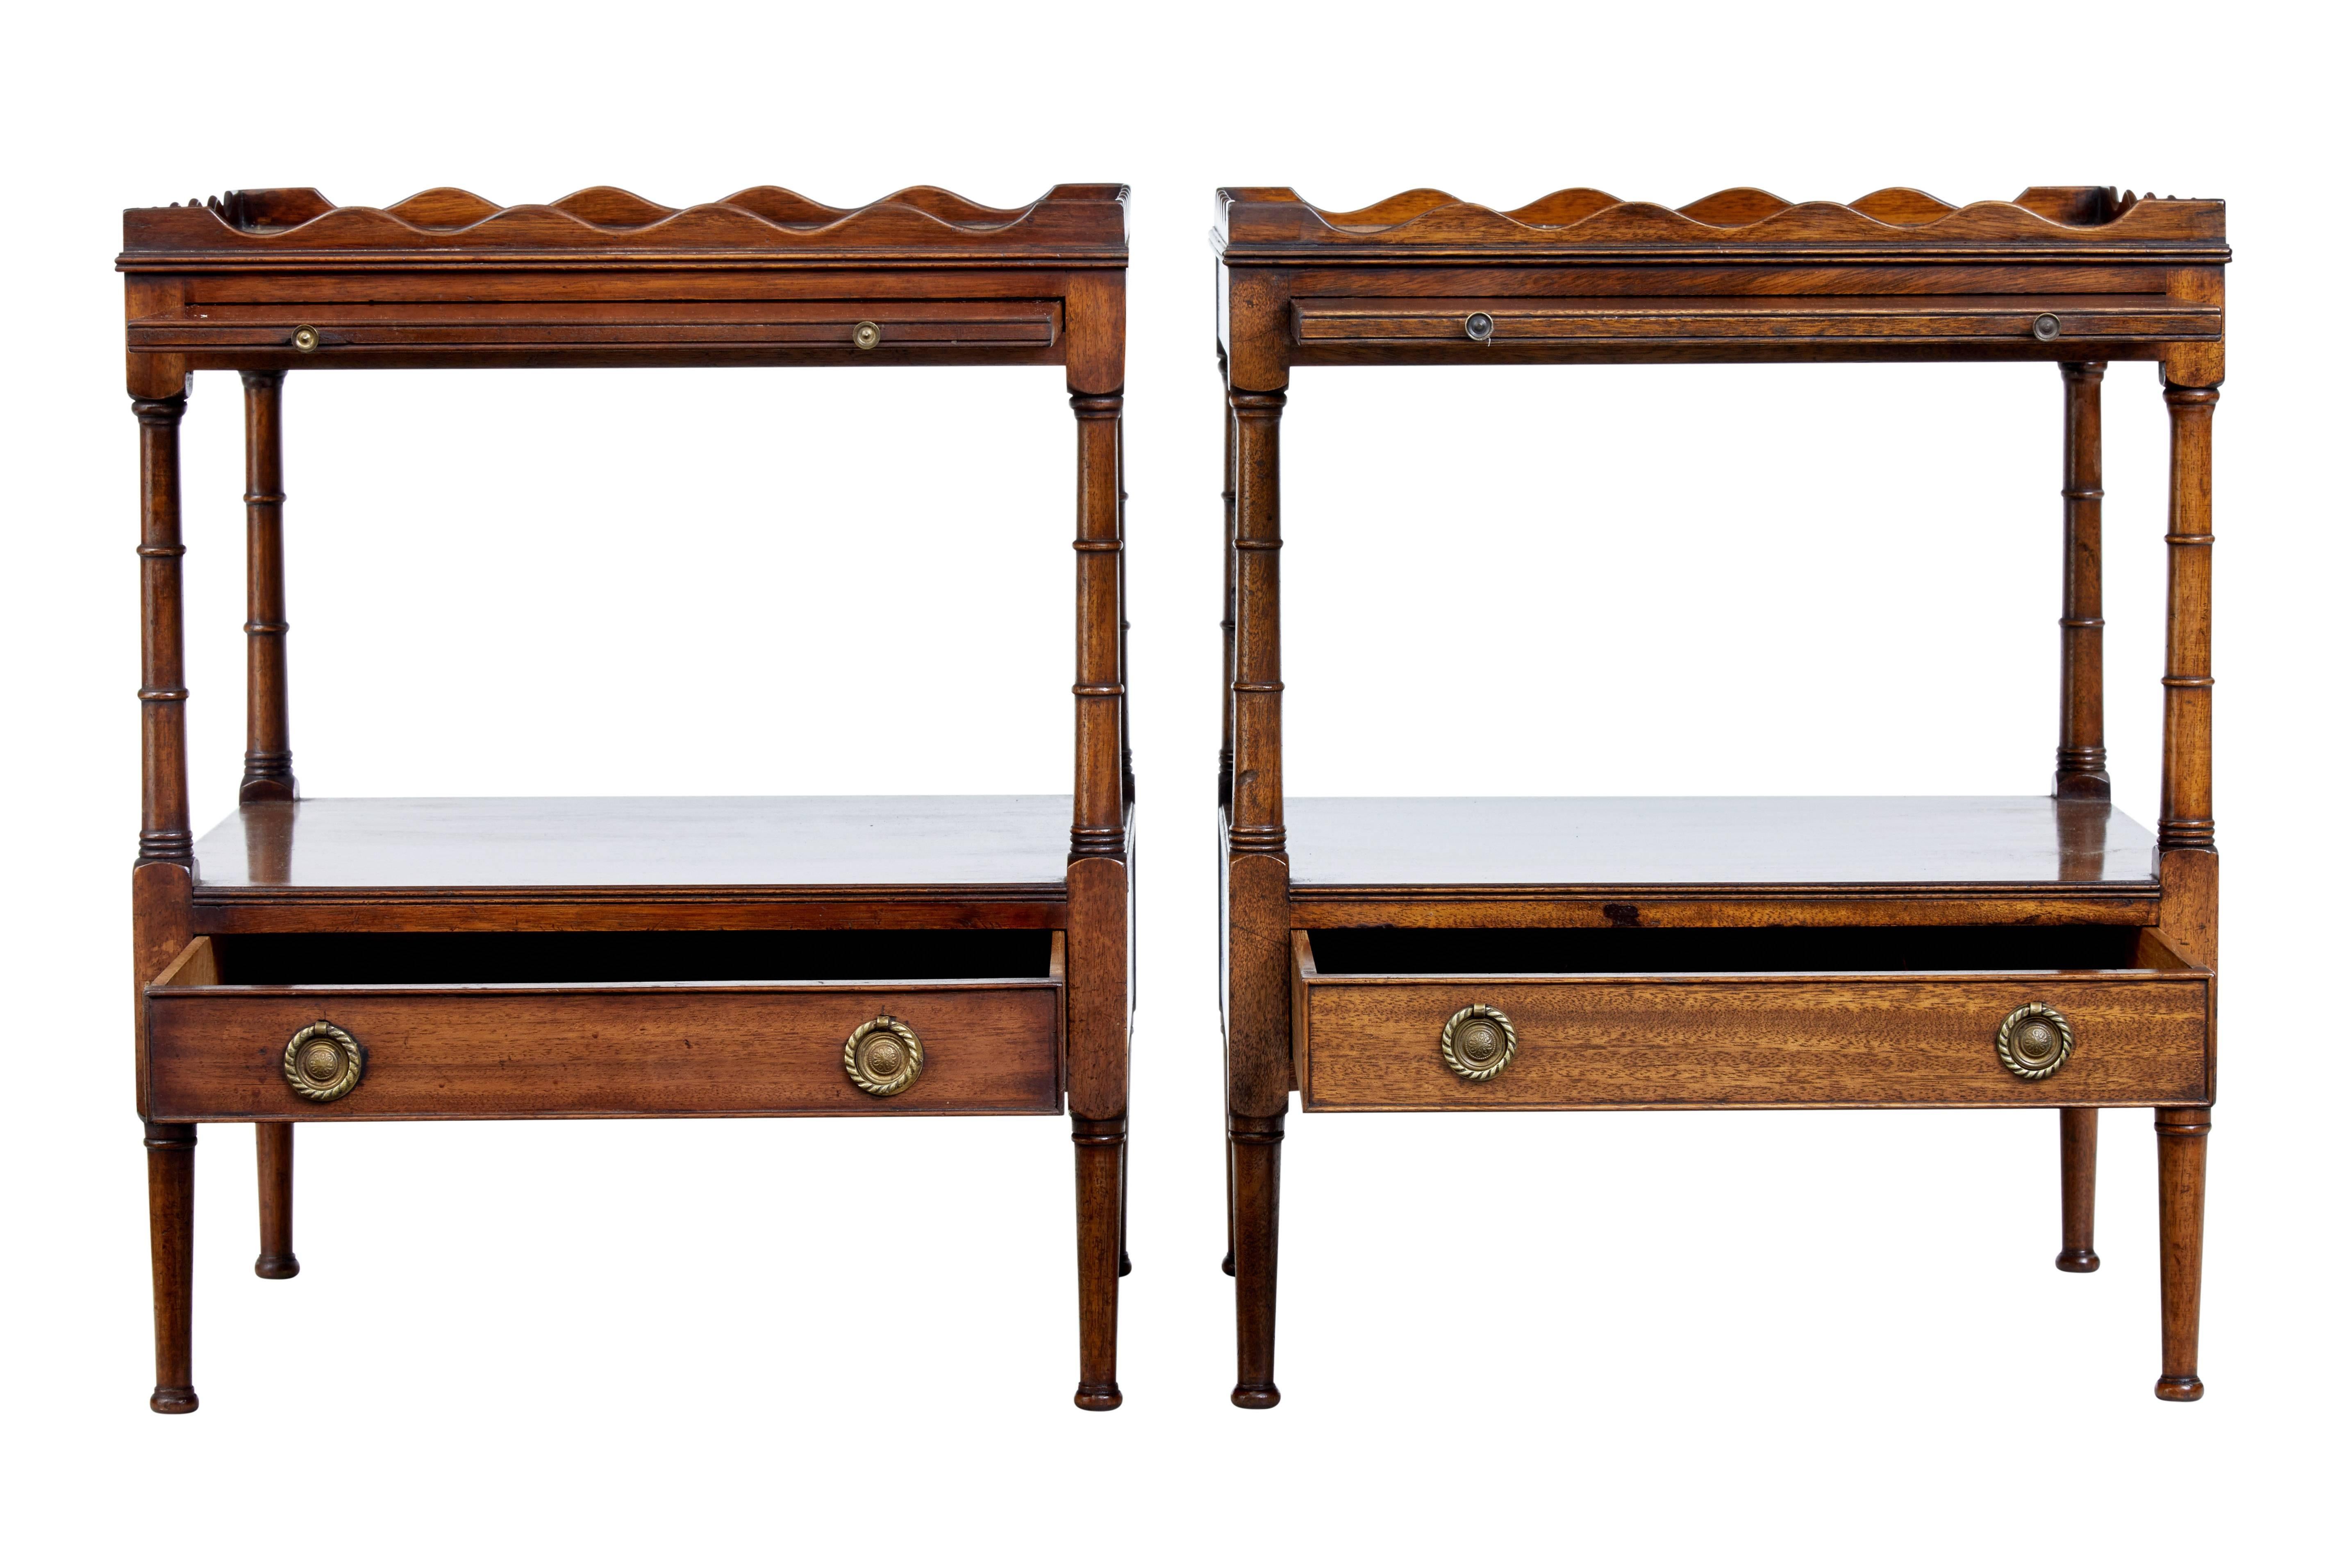 Pair of mahogany bedside tables in the early 19th century style, circa 1980.

Good quality pair of tables that could serve in the living room or the bedroom.

Shaped gallery to the top with brushing slide, below which is storage space and a